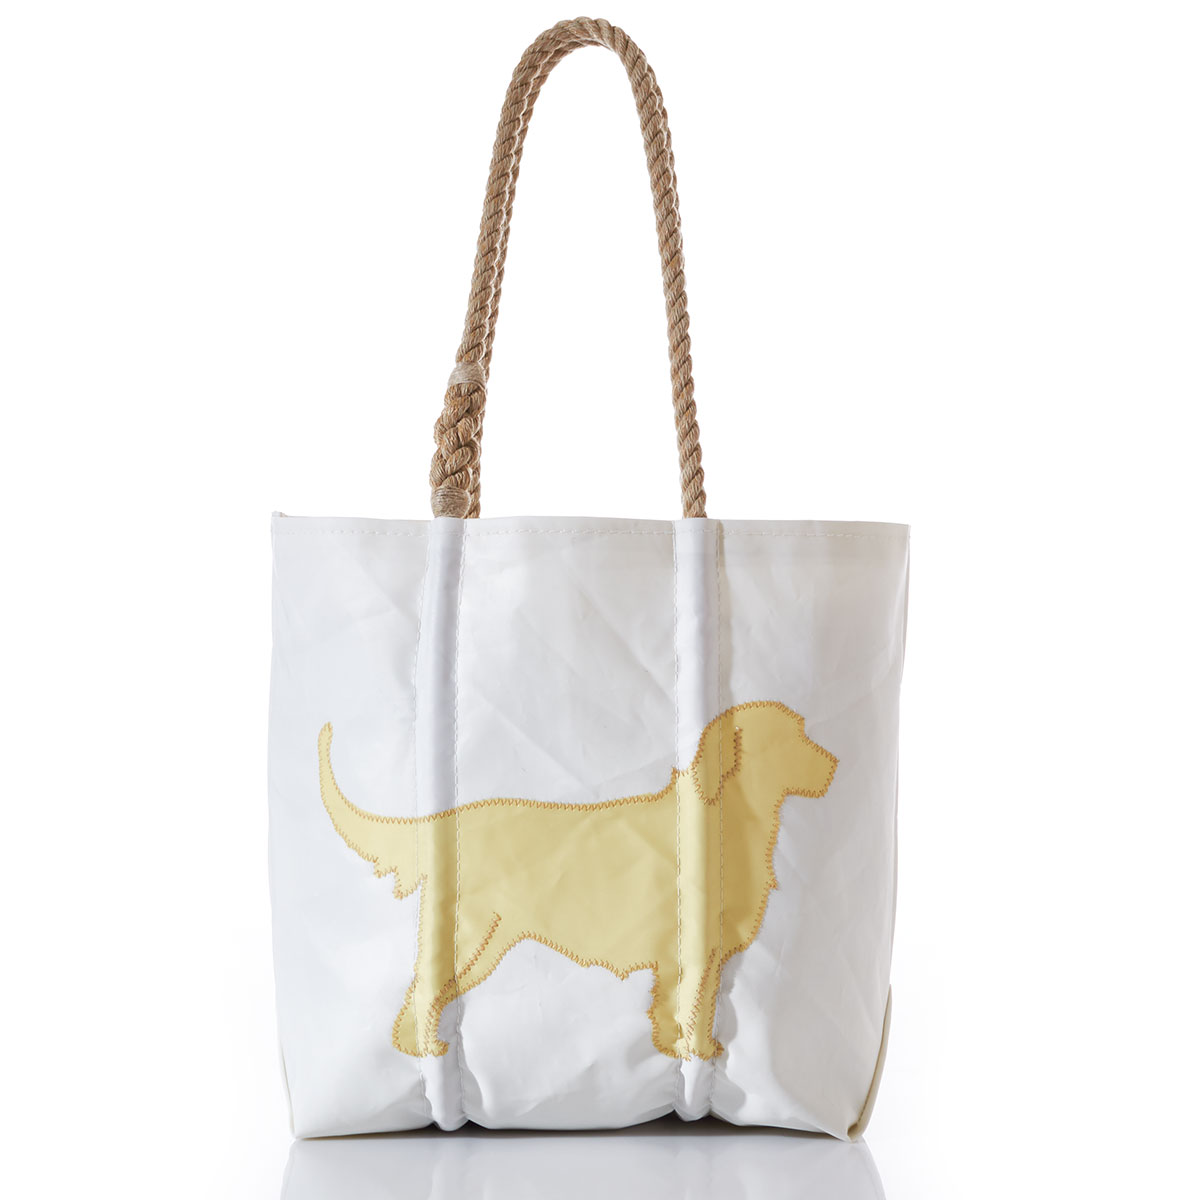 yellow applique in the shape of a golden retriever on a white recycled sail cloth tote with hemp rope handles